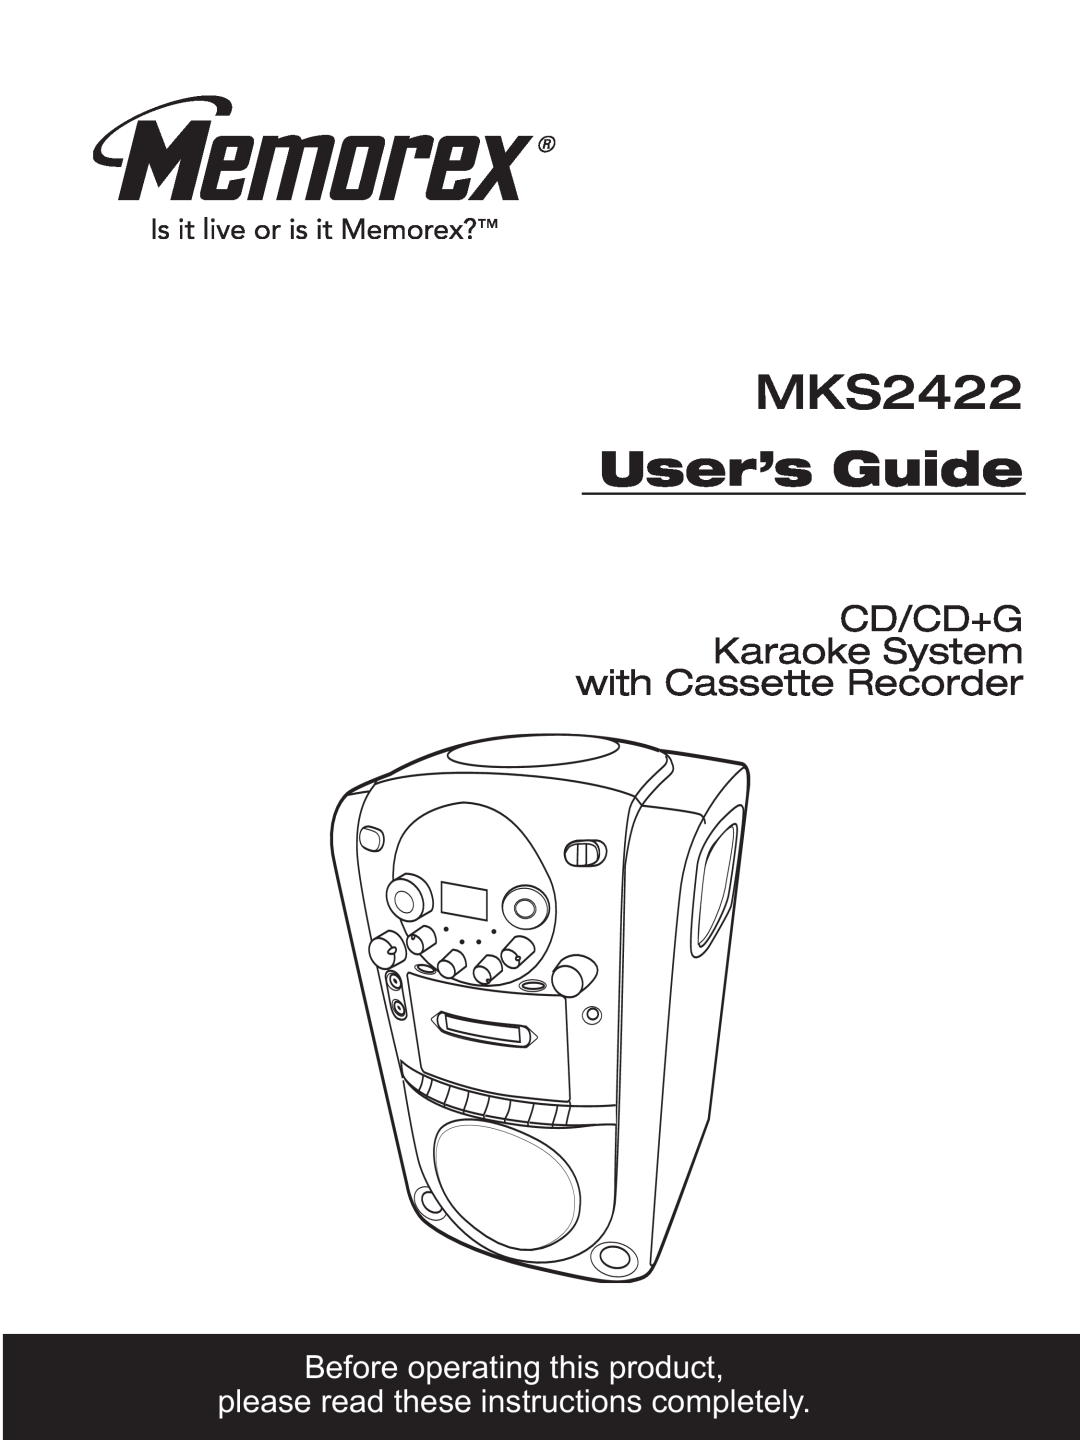 Memorex MKS2422 manual User’s Guide, CD/CD+G Karaoke System with Cassette Recorder, Before operating this product 